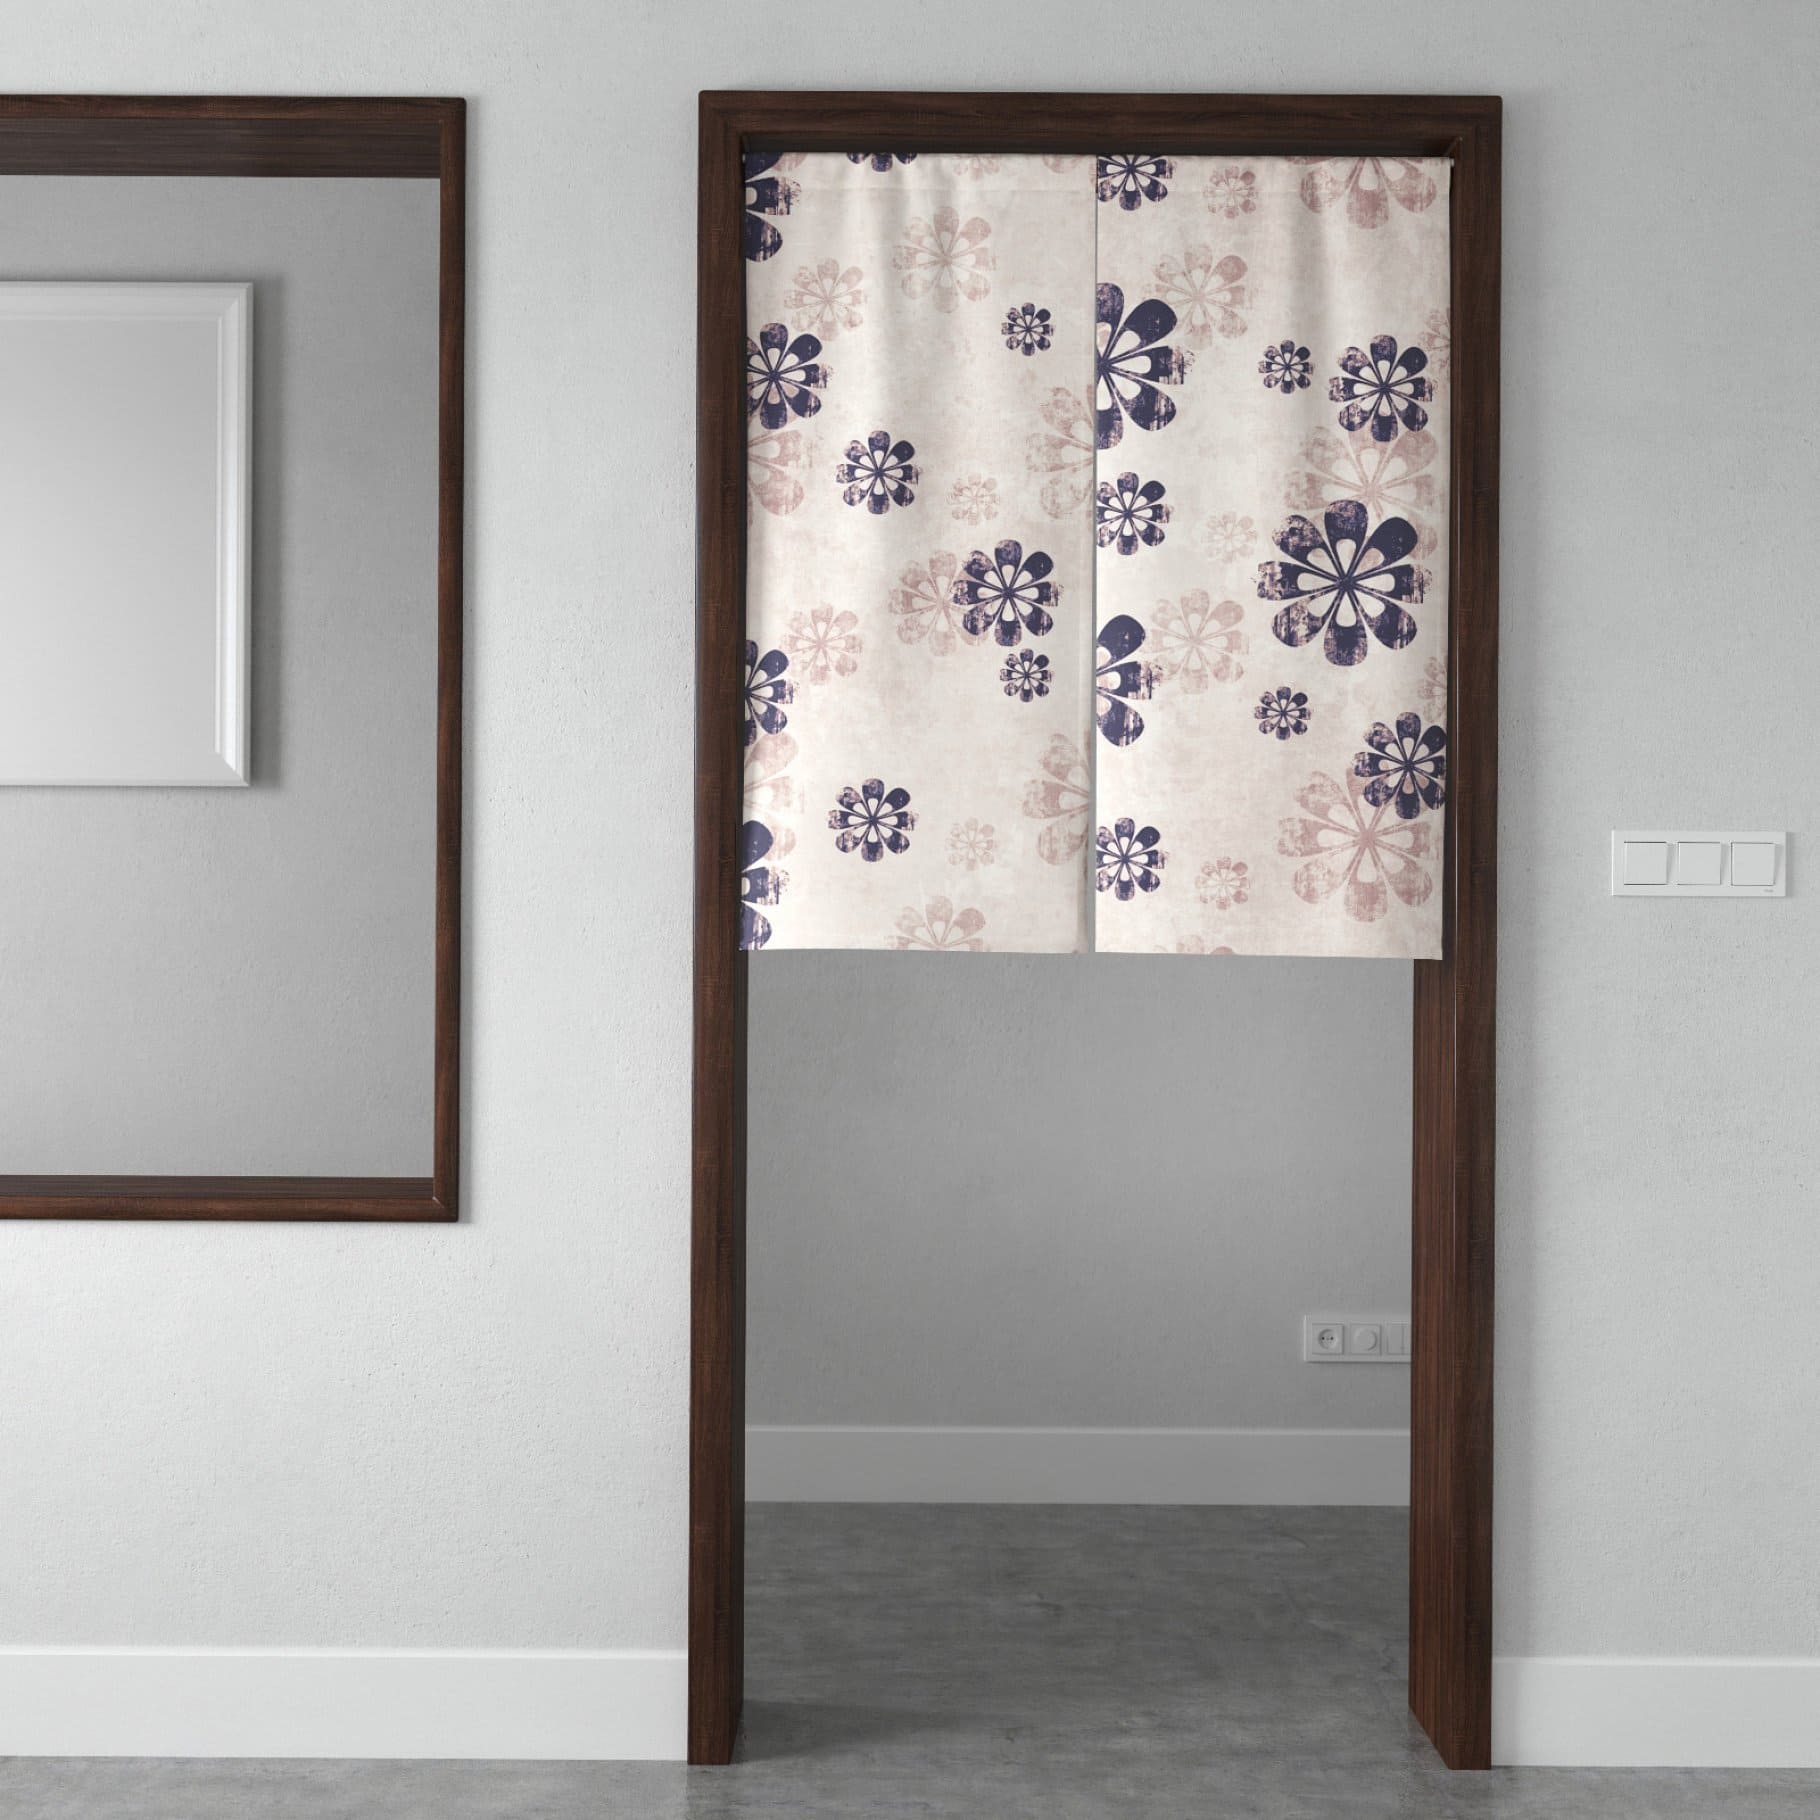 Short Japanese curtain with flowers in the doorway.